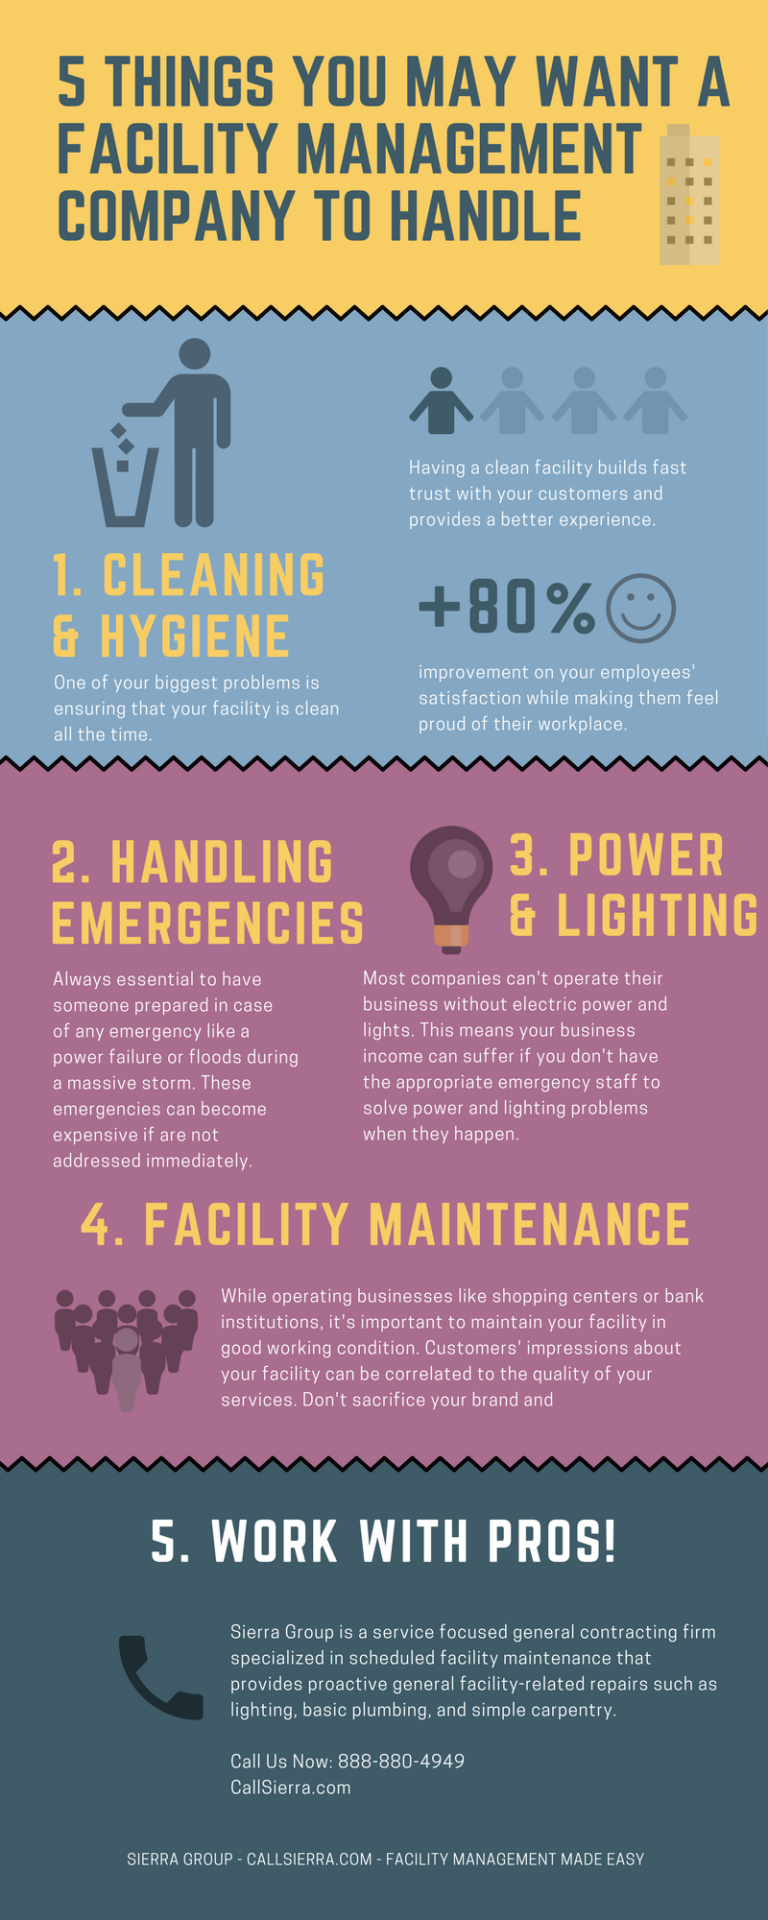 5 Things You May Want a Facility Management Company to Handle